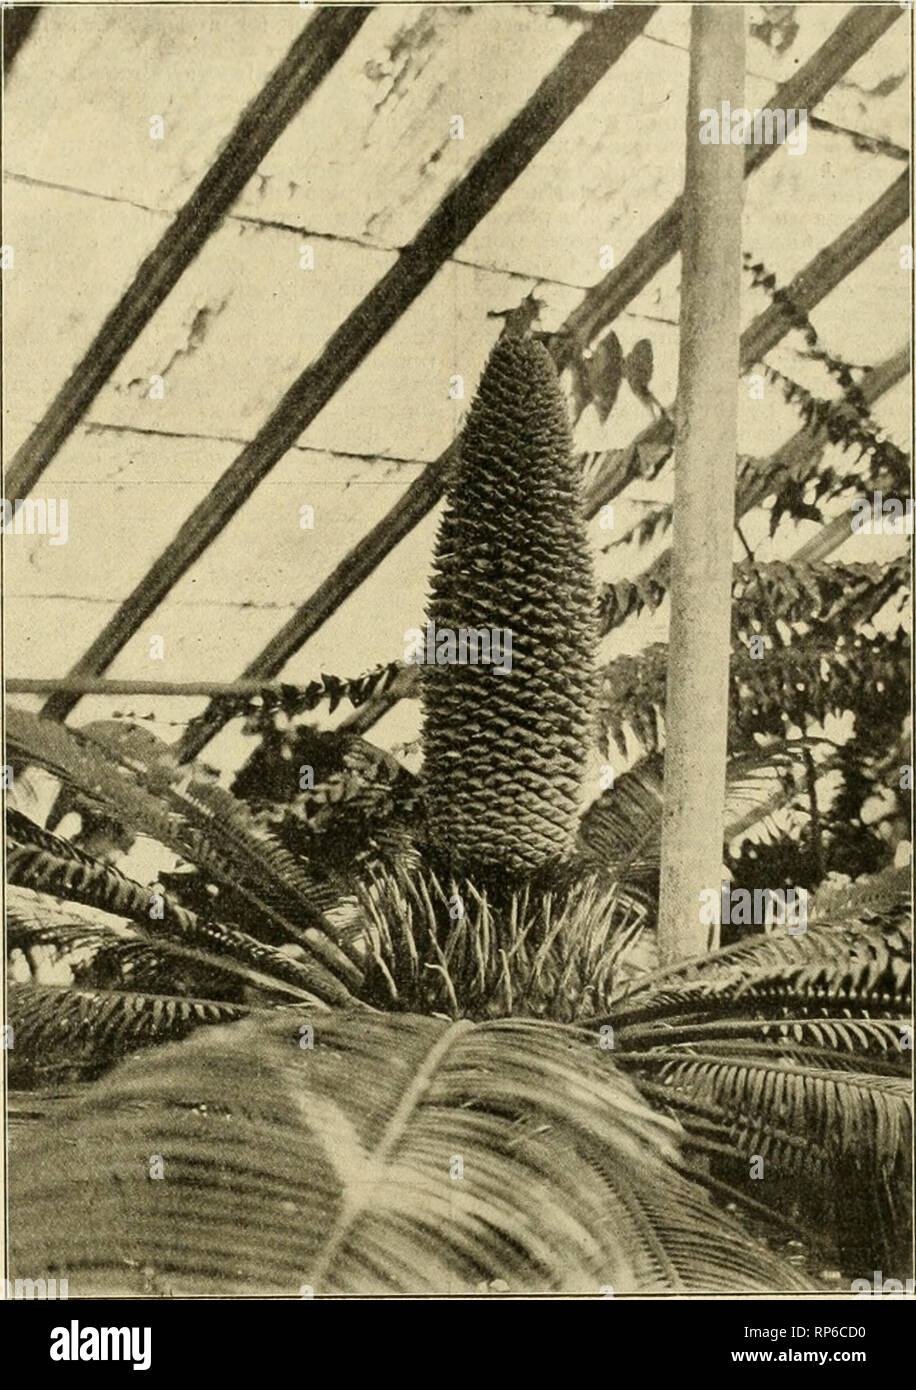 . The American florist : a weekly journal for the trade. Floriculture; Florists. tgot. The American. Florist. 1699 Cycas Revoluta in Bloom. Ed. Am. Florist:—Thinking possibly you would be interested, I have the pleasure of sending by this mail a photograph of Cycas revoluta that I have had in bloom in my greenhouse for the past six or seven weeks; in fact, the bloom first made its appearance some time in May, and later on developed into a cone-like flower fully nineteen inches in height. As near as I can tell, the plant is from thirty-five to forty years old, but there is a diversity of opinio Stock Photo